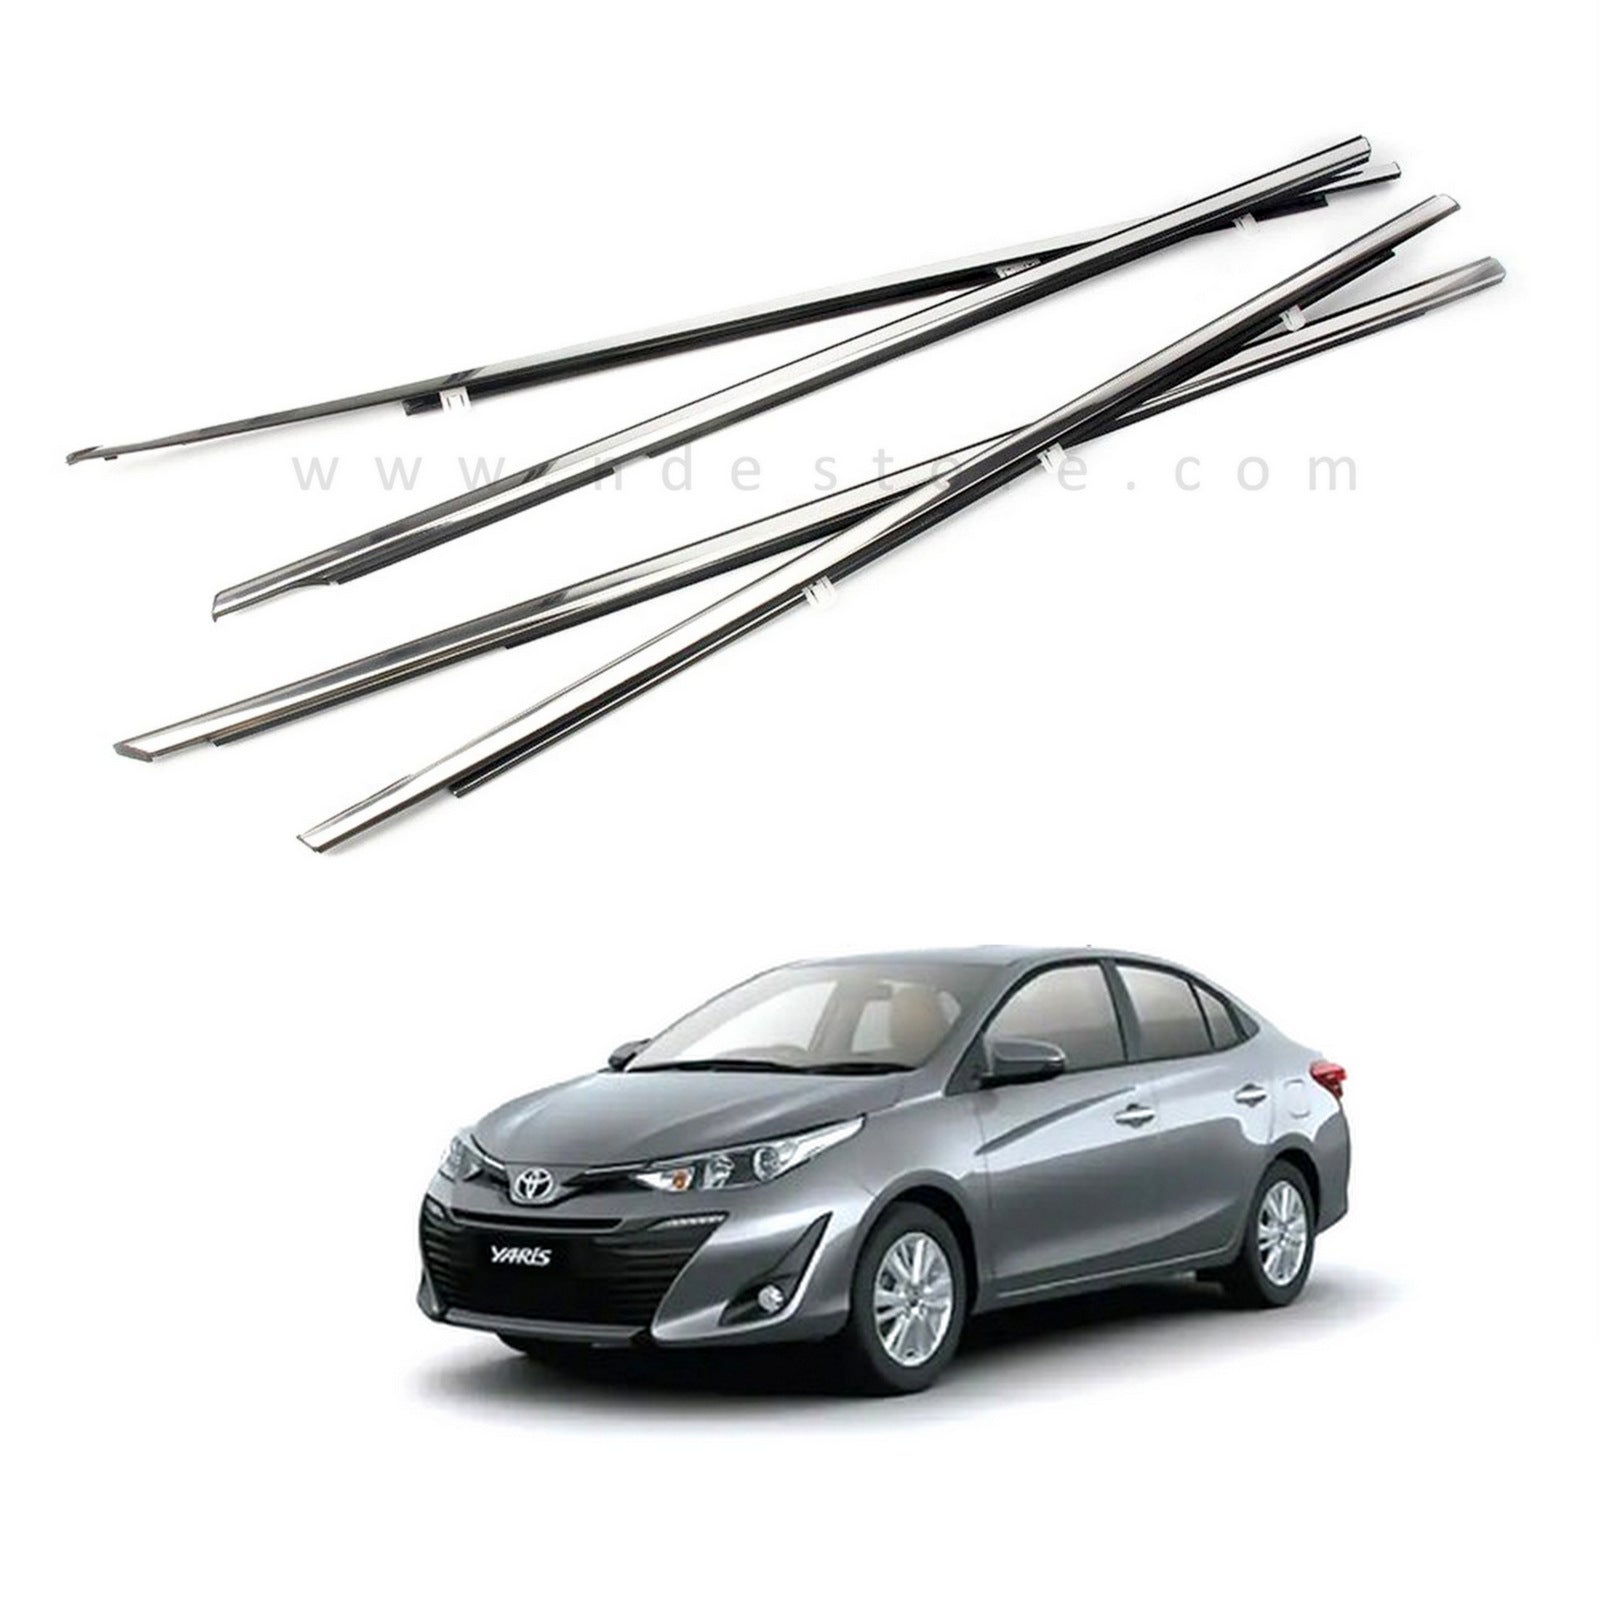 KEY COVER PREMIUM QUALITY FOR TOYOTA YARIS - NDE STORE